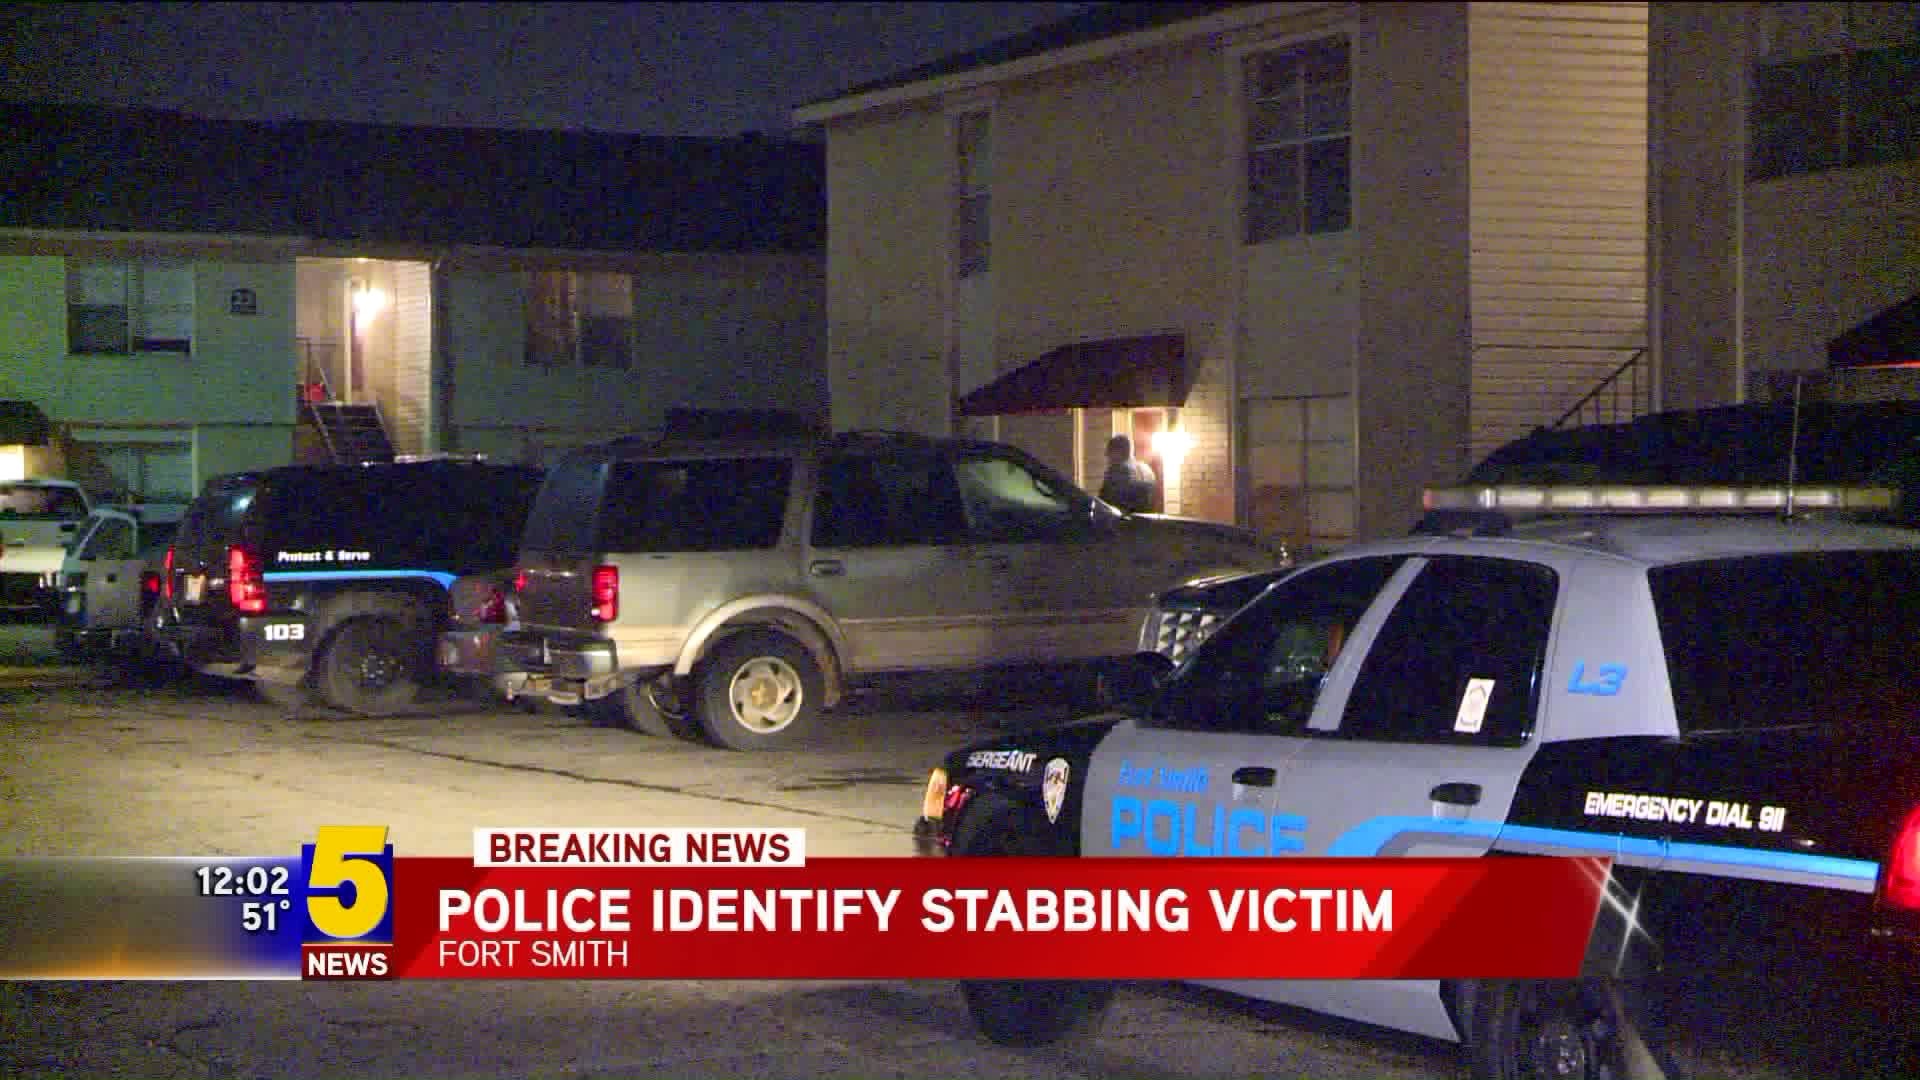 Police Identify Stabbing Victim Fort Smith Timberland Apartments Stabbing